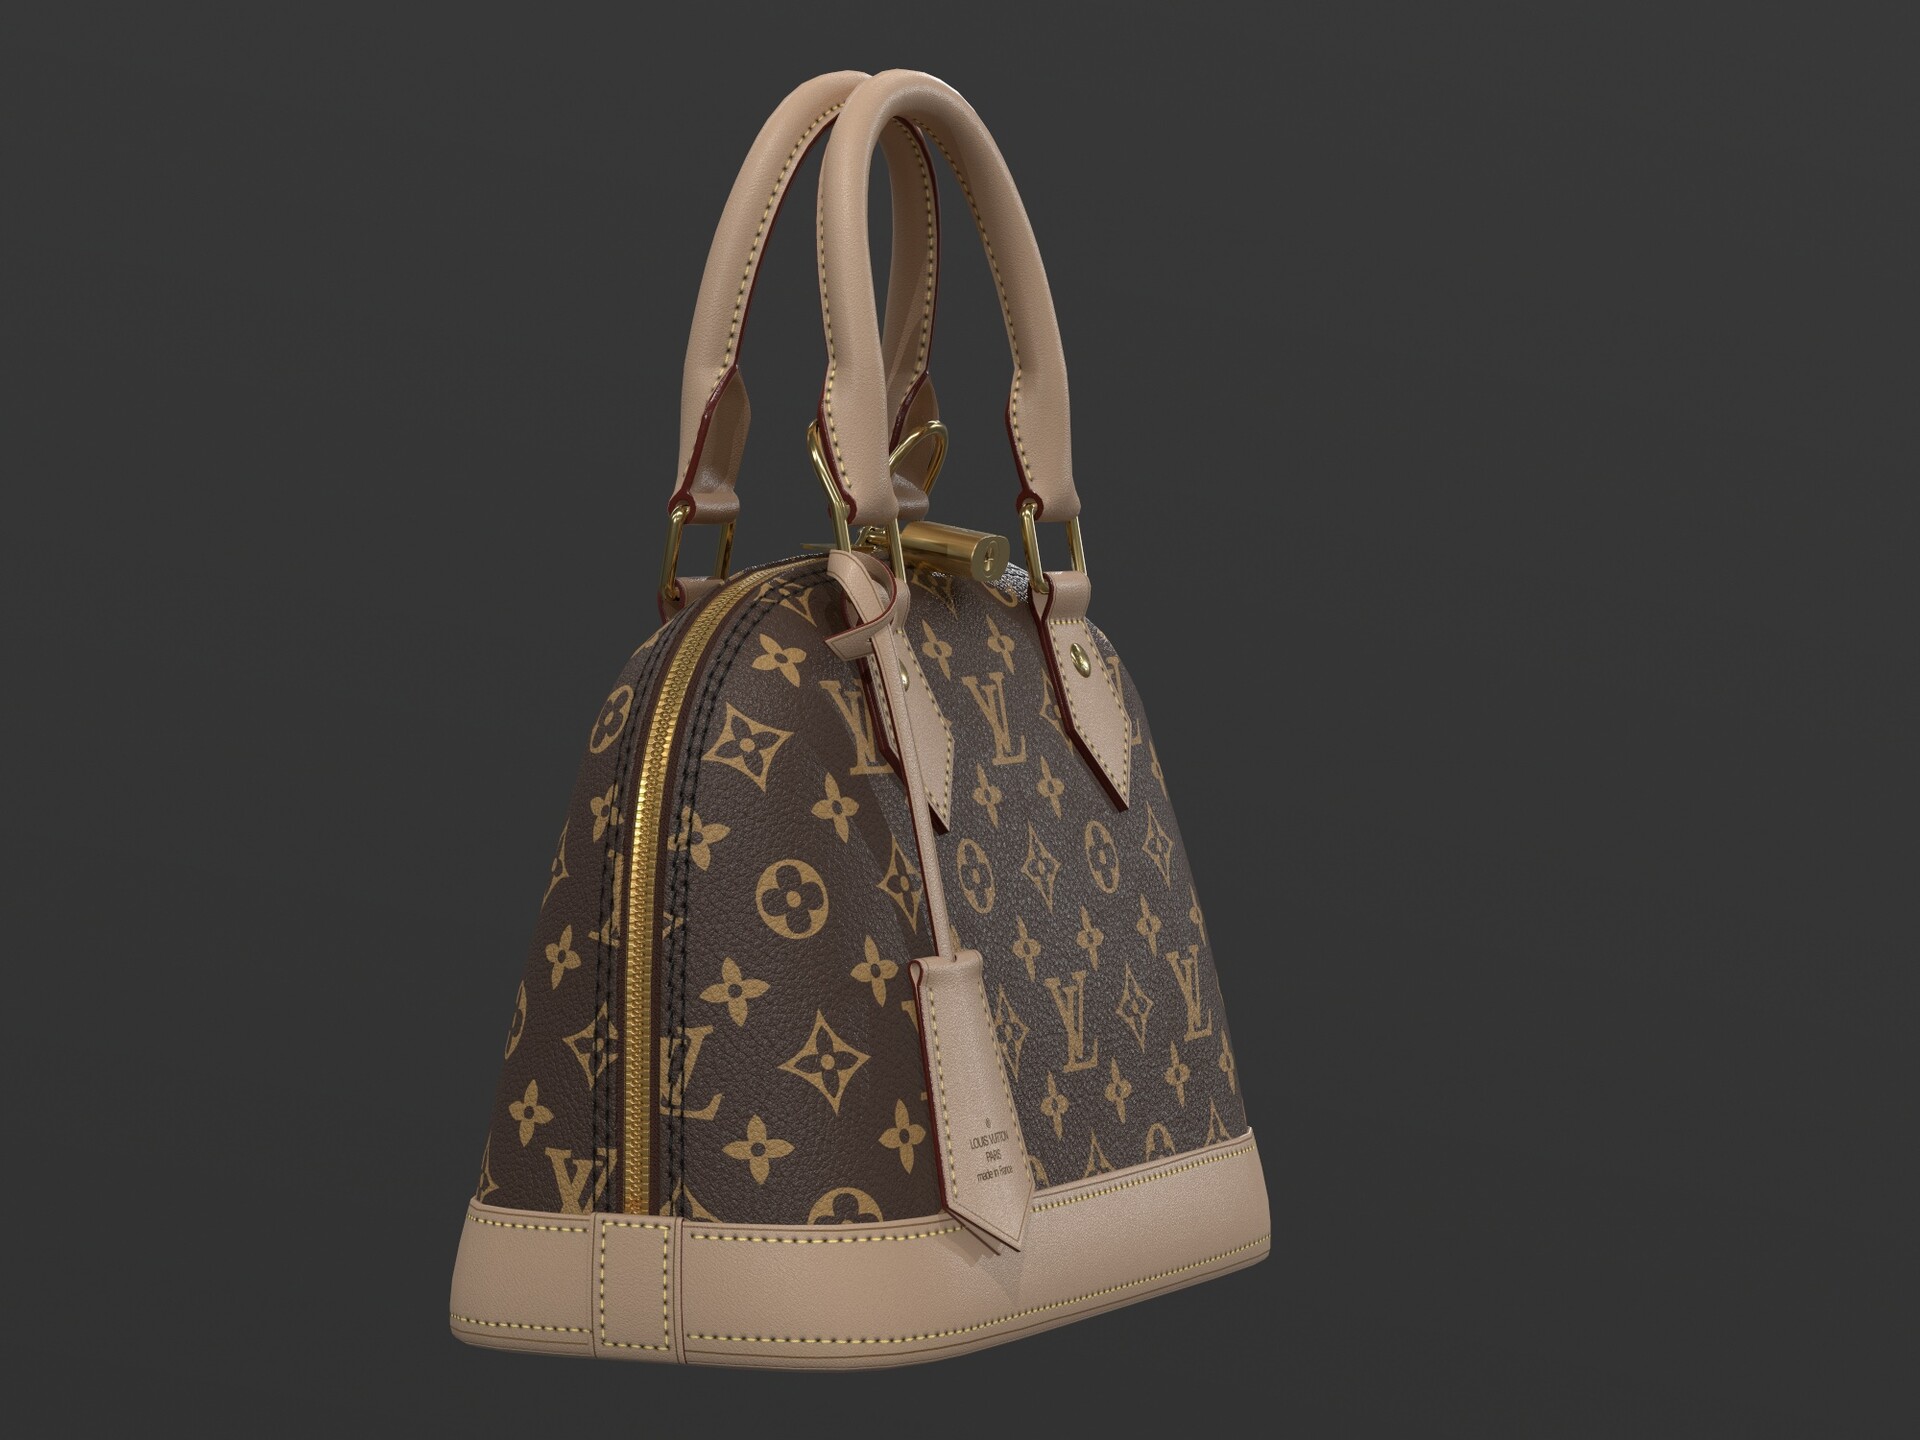 3D model Louis Vuitton Alma BB Top Handle Bag in Epi Leather Spring VR / AR  / low-poly